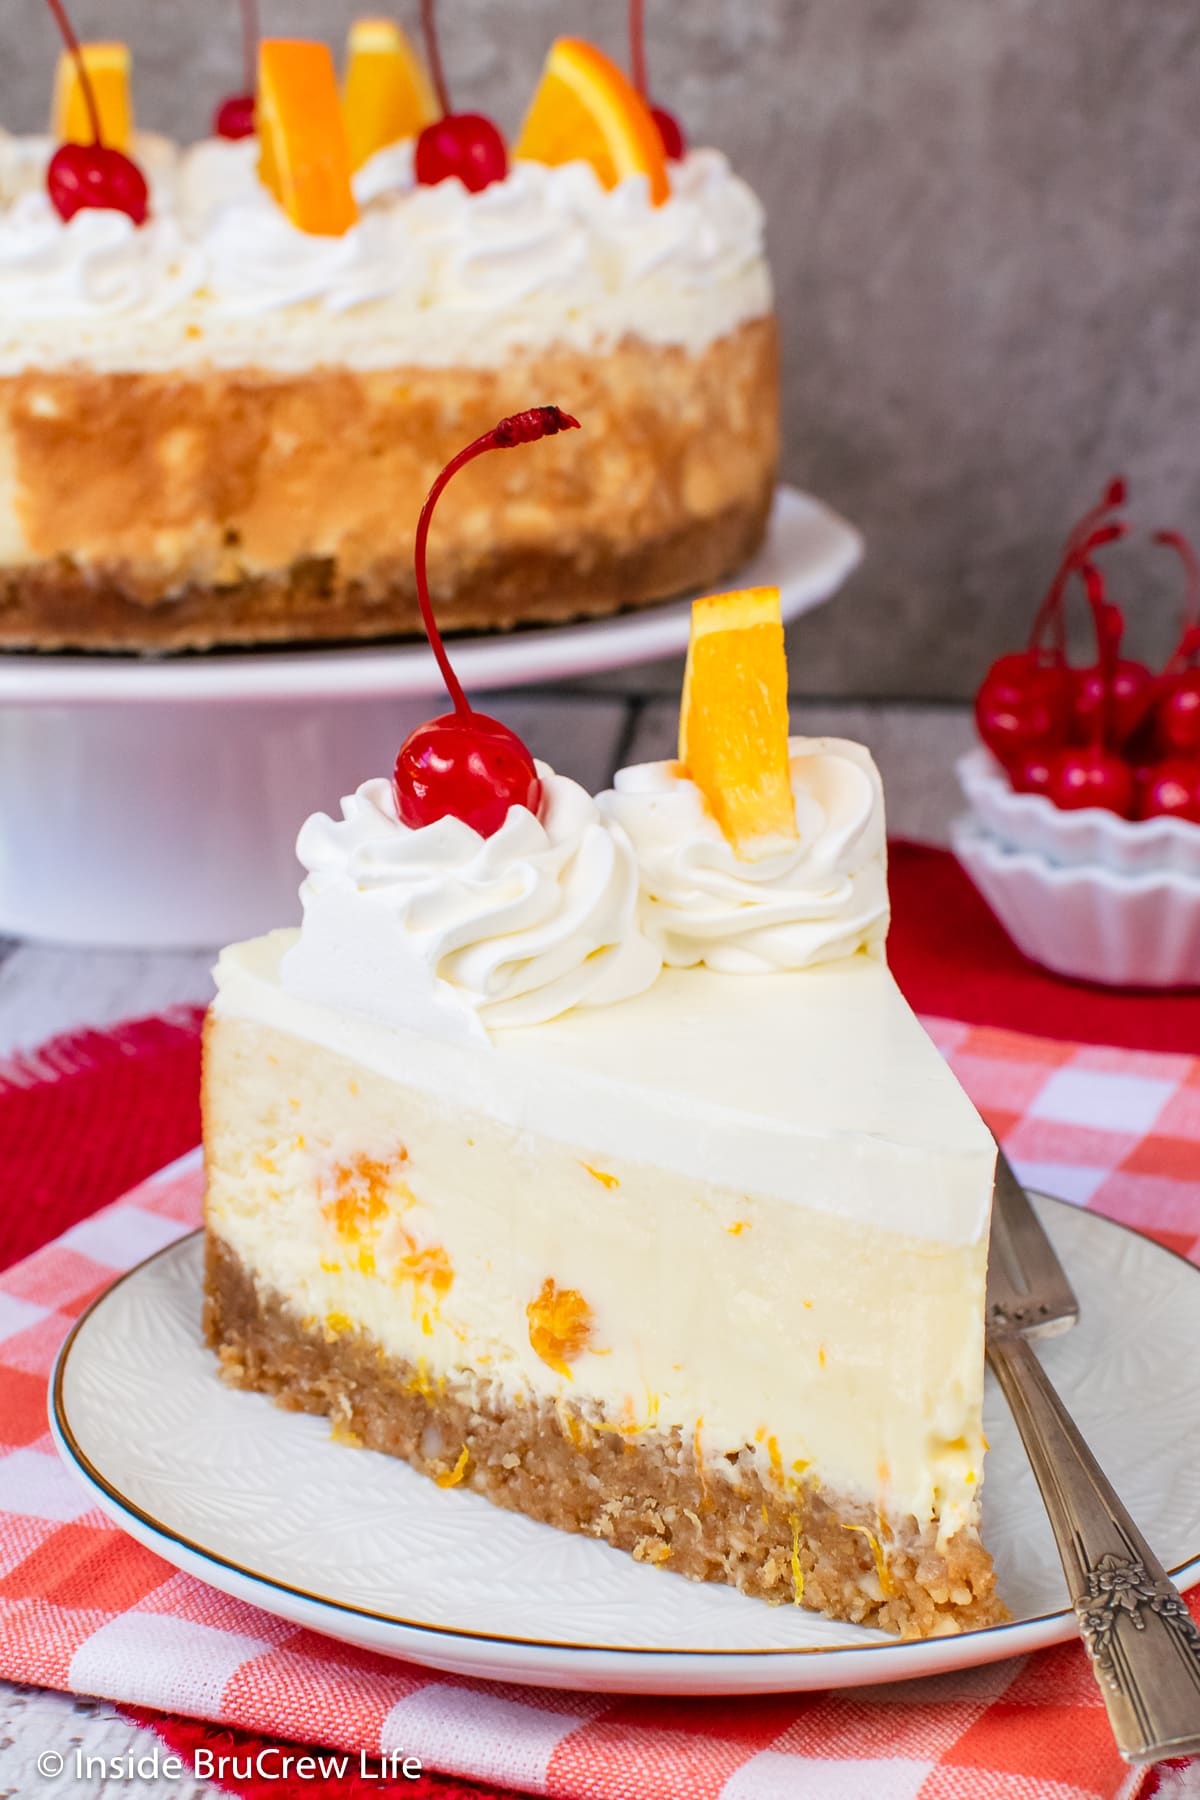 A slice of cheesecake with cool whip, cherries, and oranges.